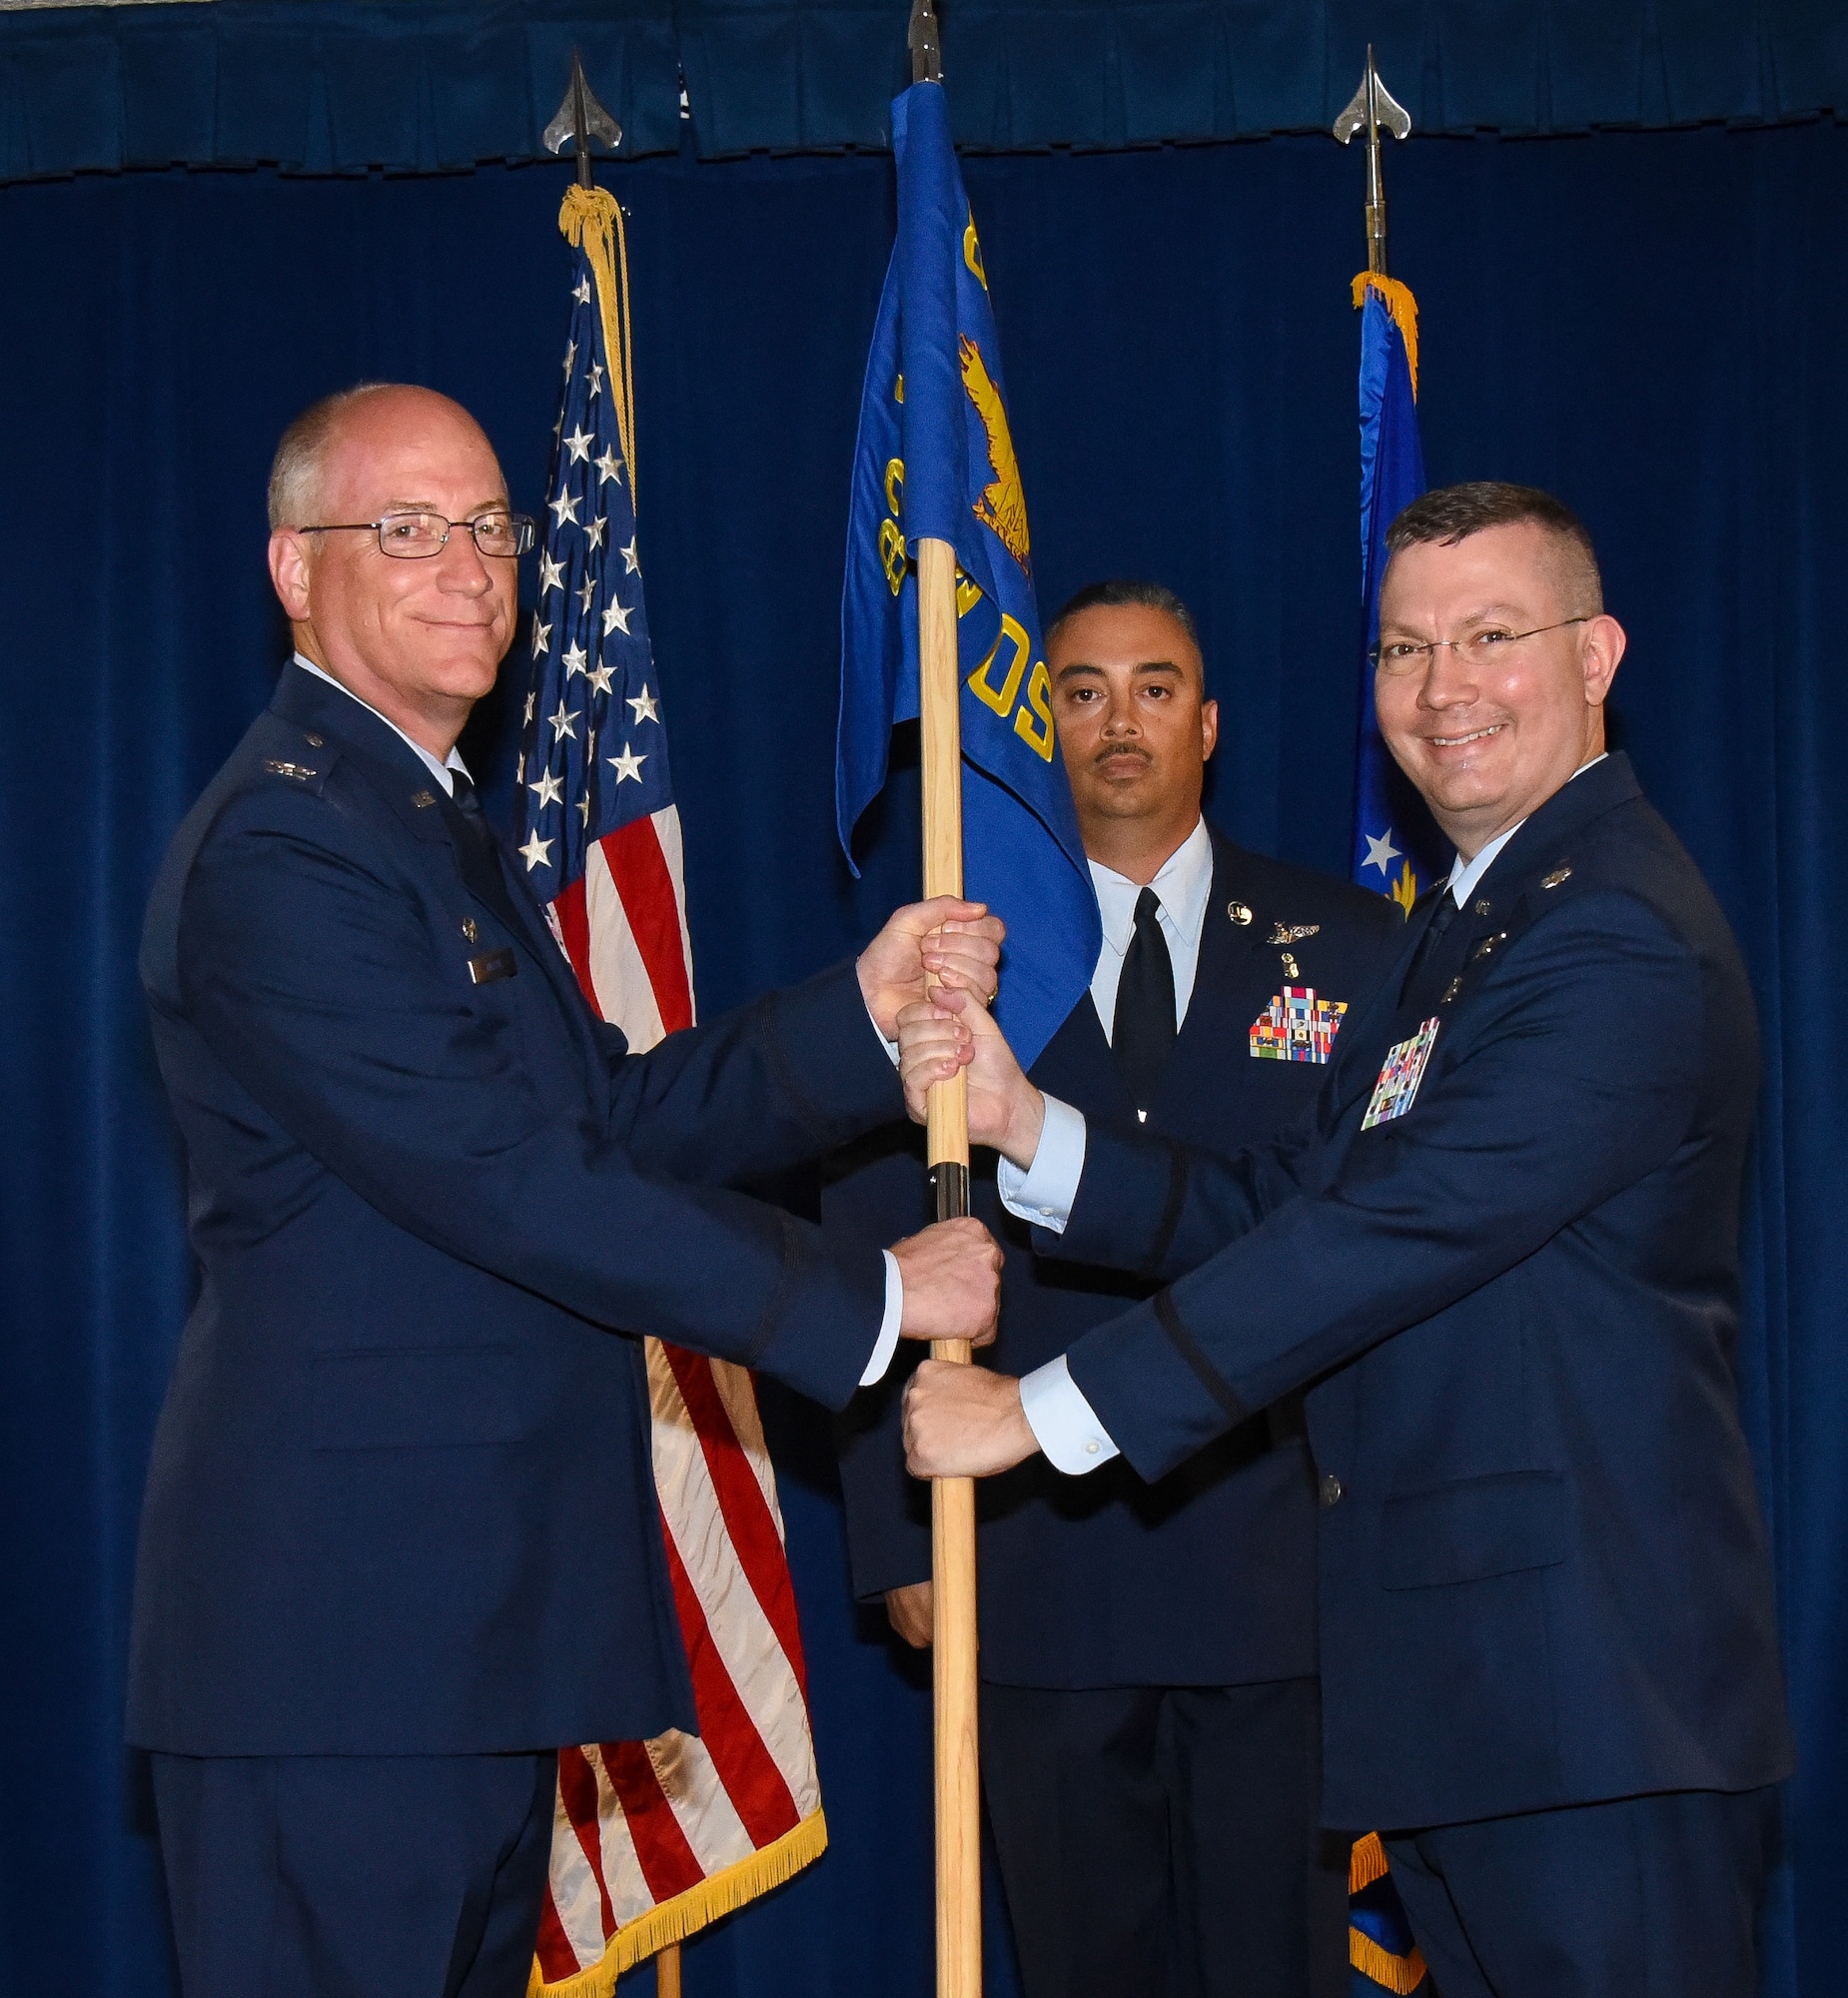 AMDS, MDOS begin new chapters after redesignation